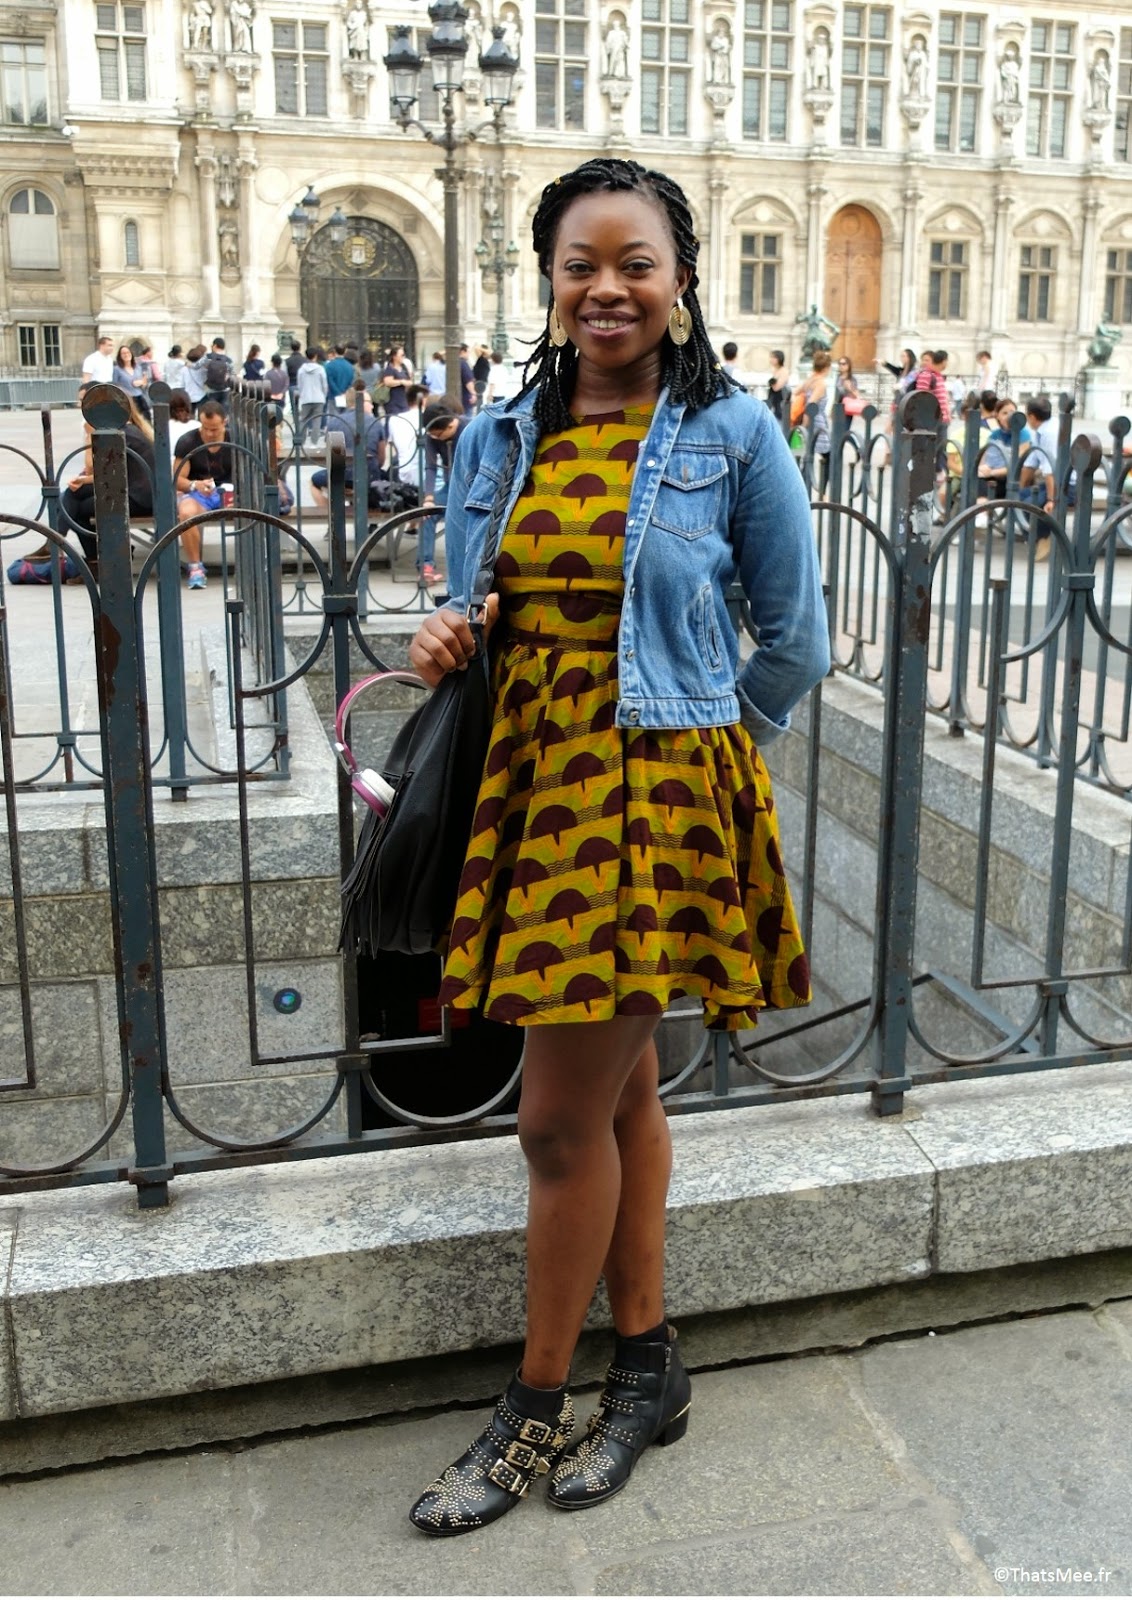 style de la semaine ootd modern african queen ThatsMee.fr, sac André franges, boots Choies Chloé, robe homemade cousue wax tissu africain 